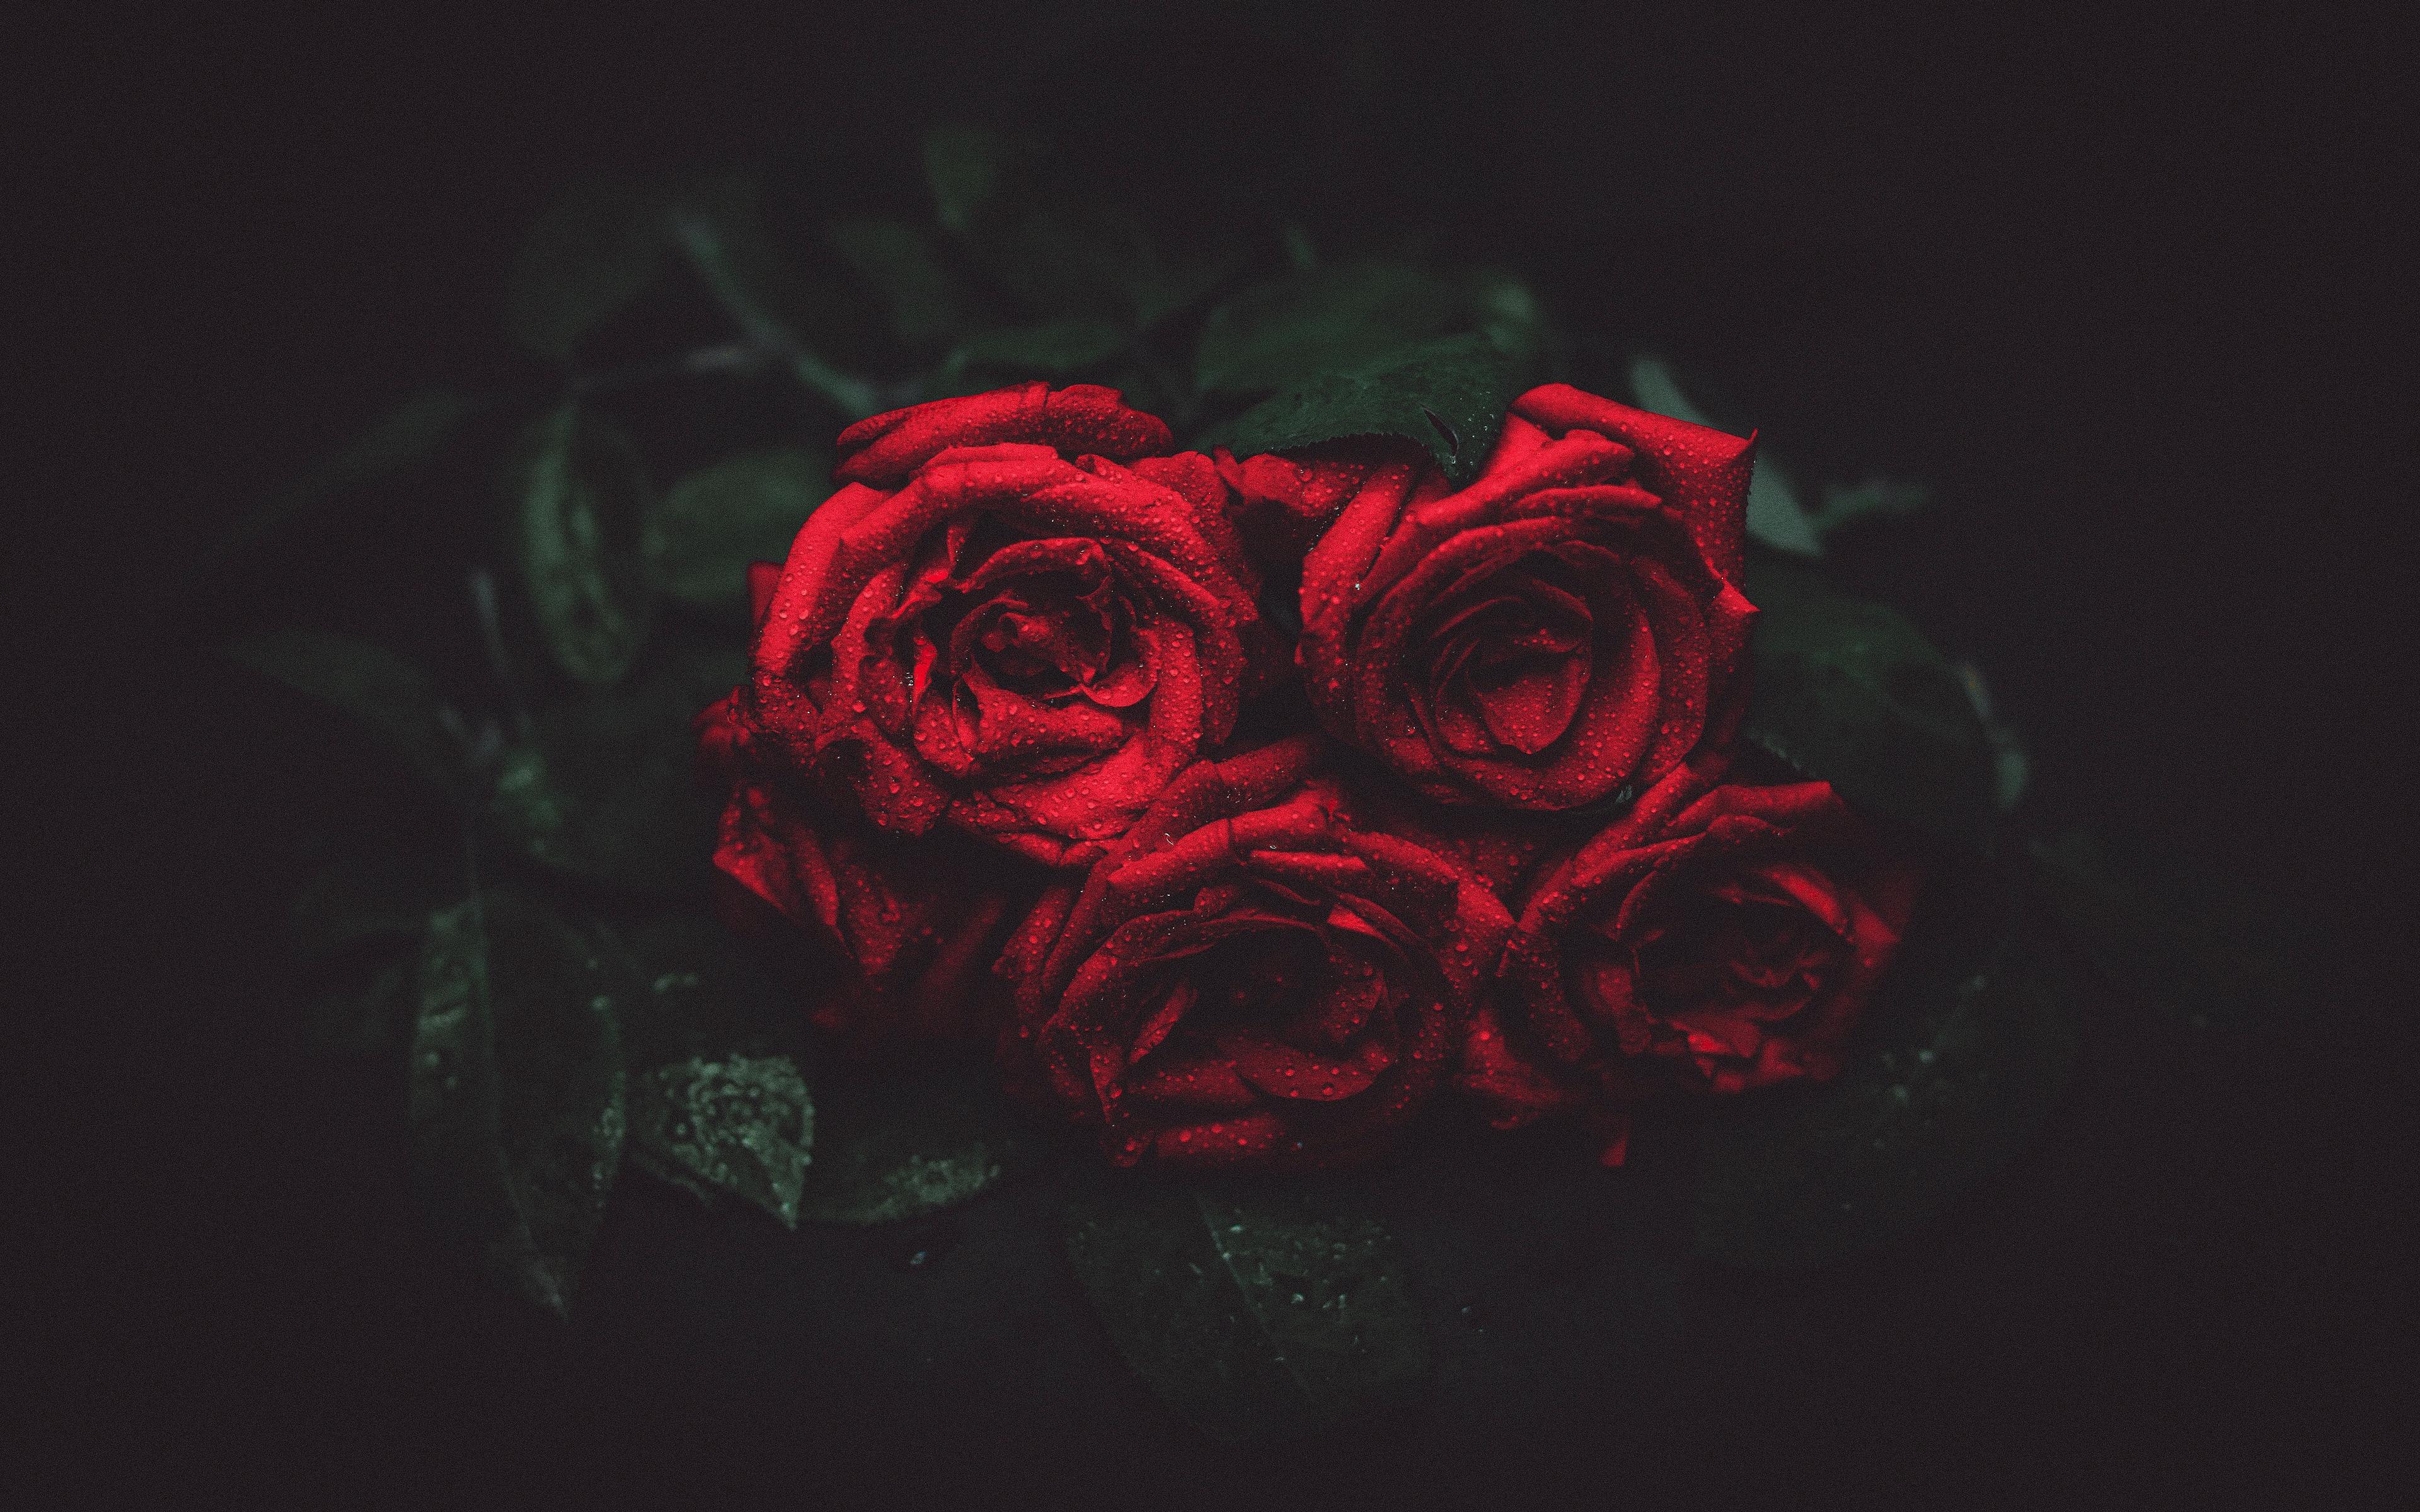 Download wallpapers 3840x2400 roses, drops, buds, dark backgrounds 4k